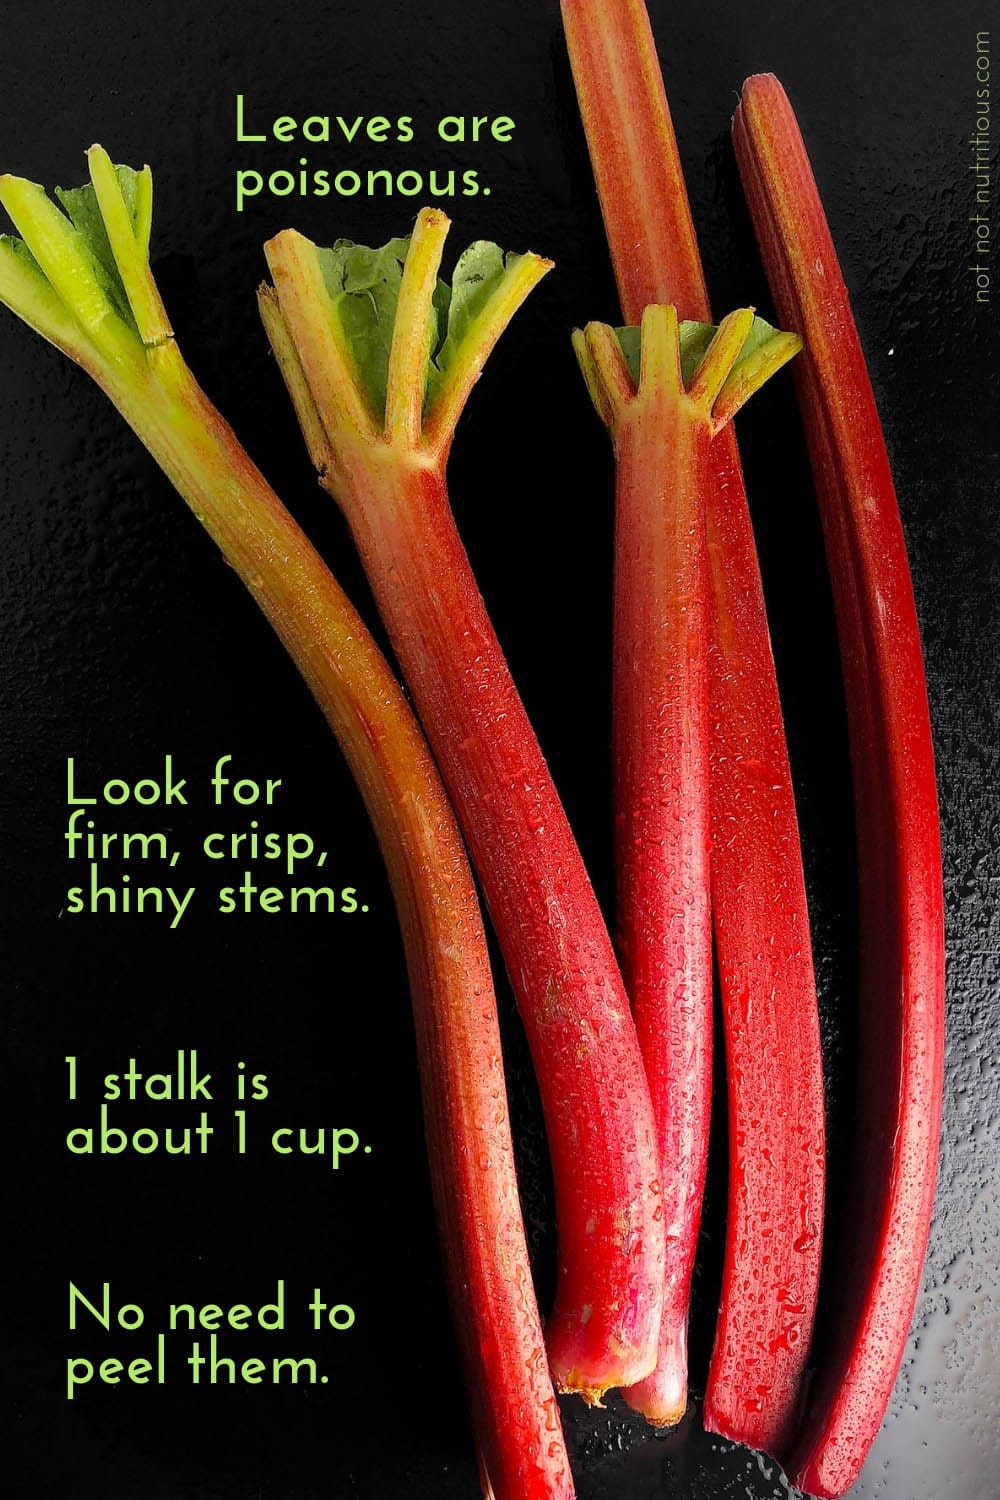 Infographic with facts about rhubarb. Leaves are poisonous. Look for firm, crisp, shiny stems, 1 stalk of rhubarb is about 1 cup. You don't need to peel rhubarb.